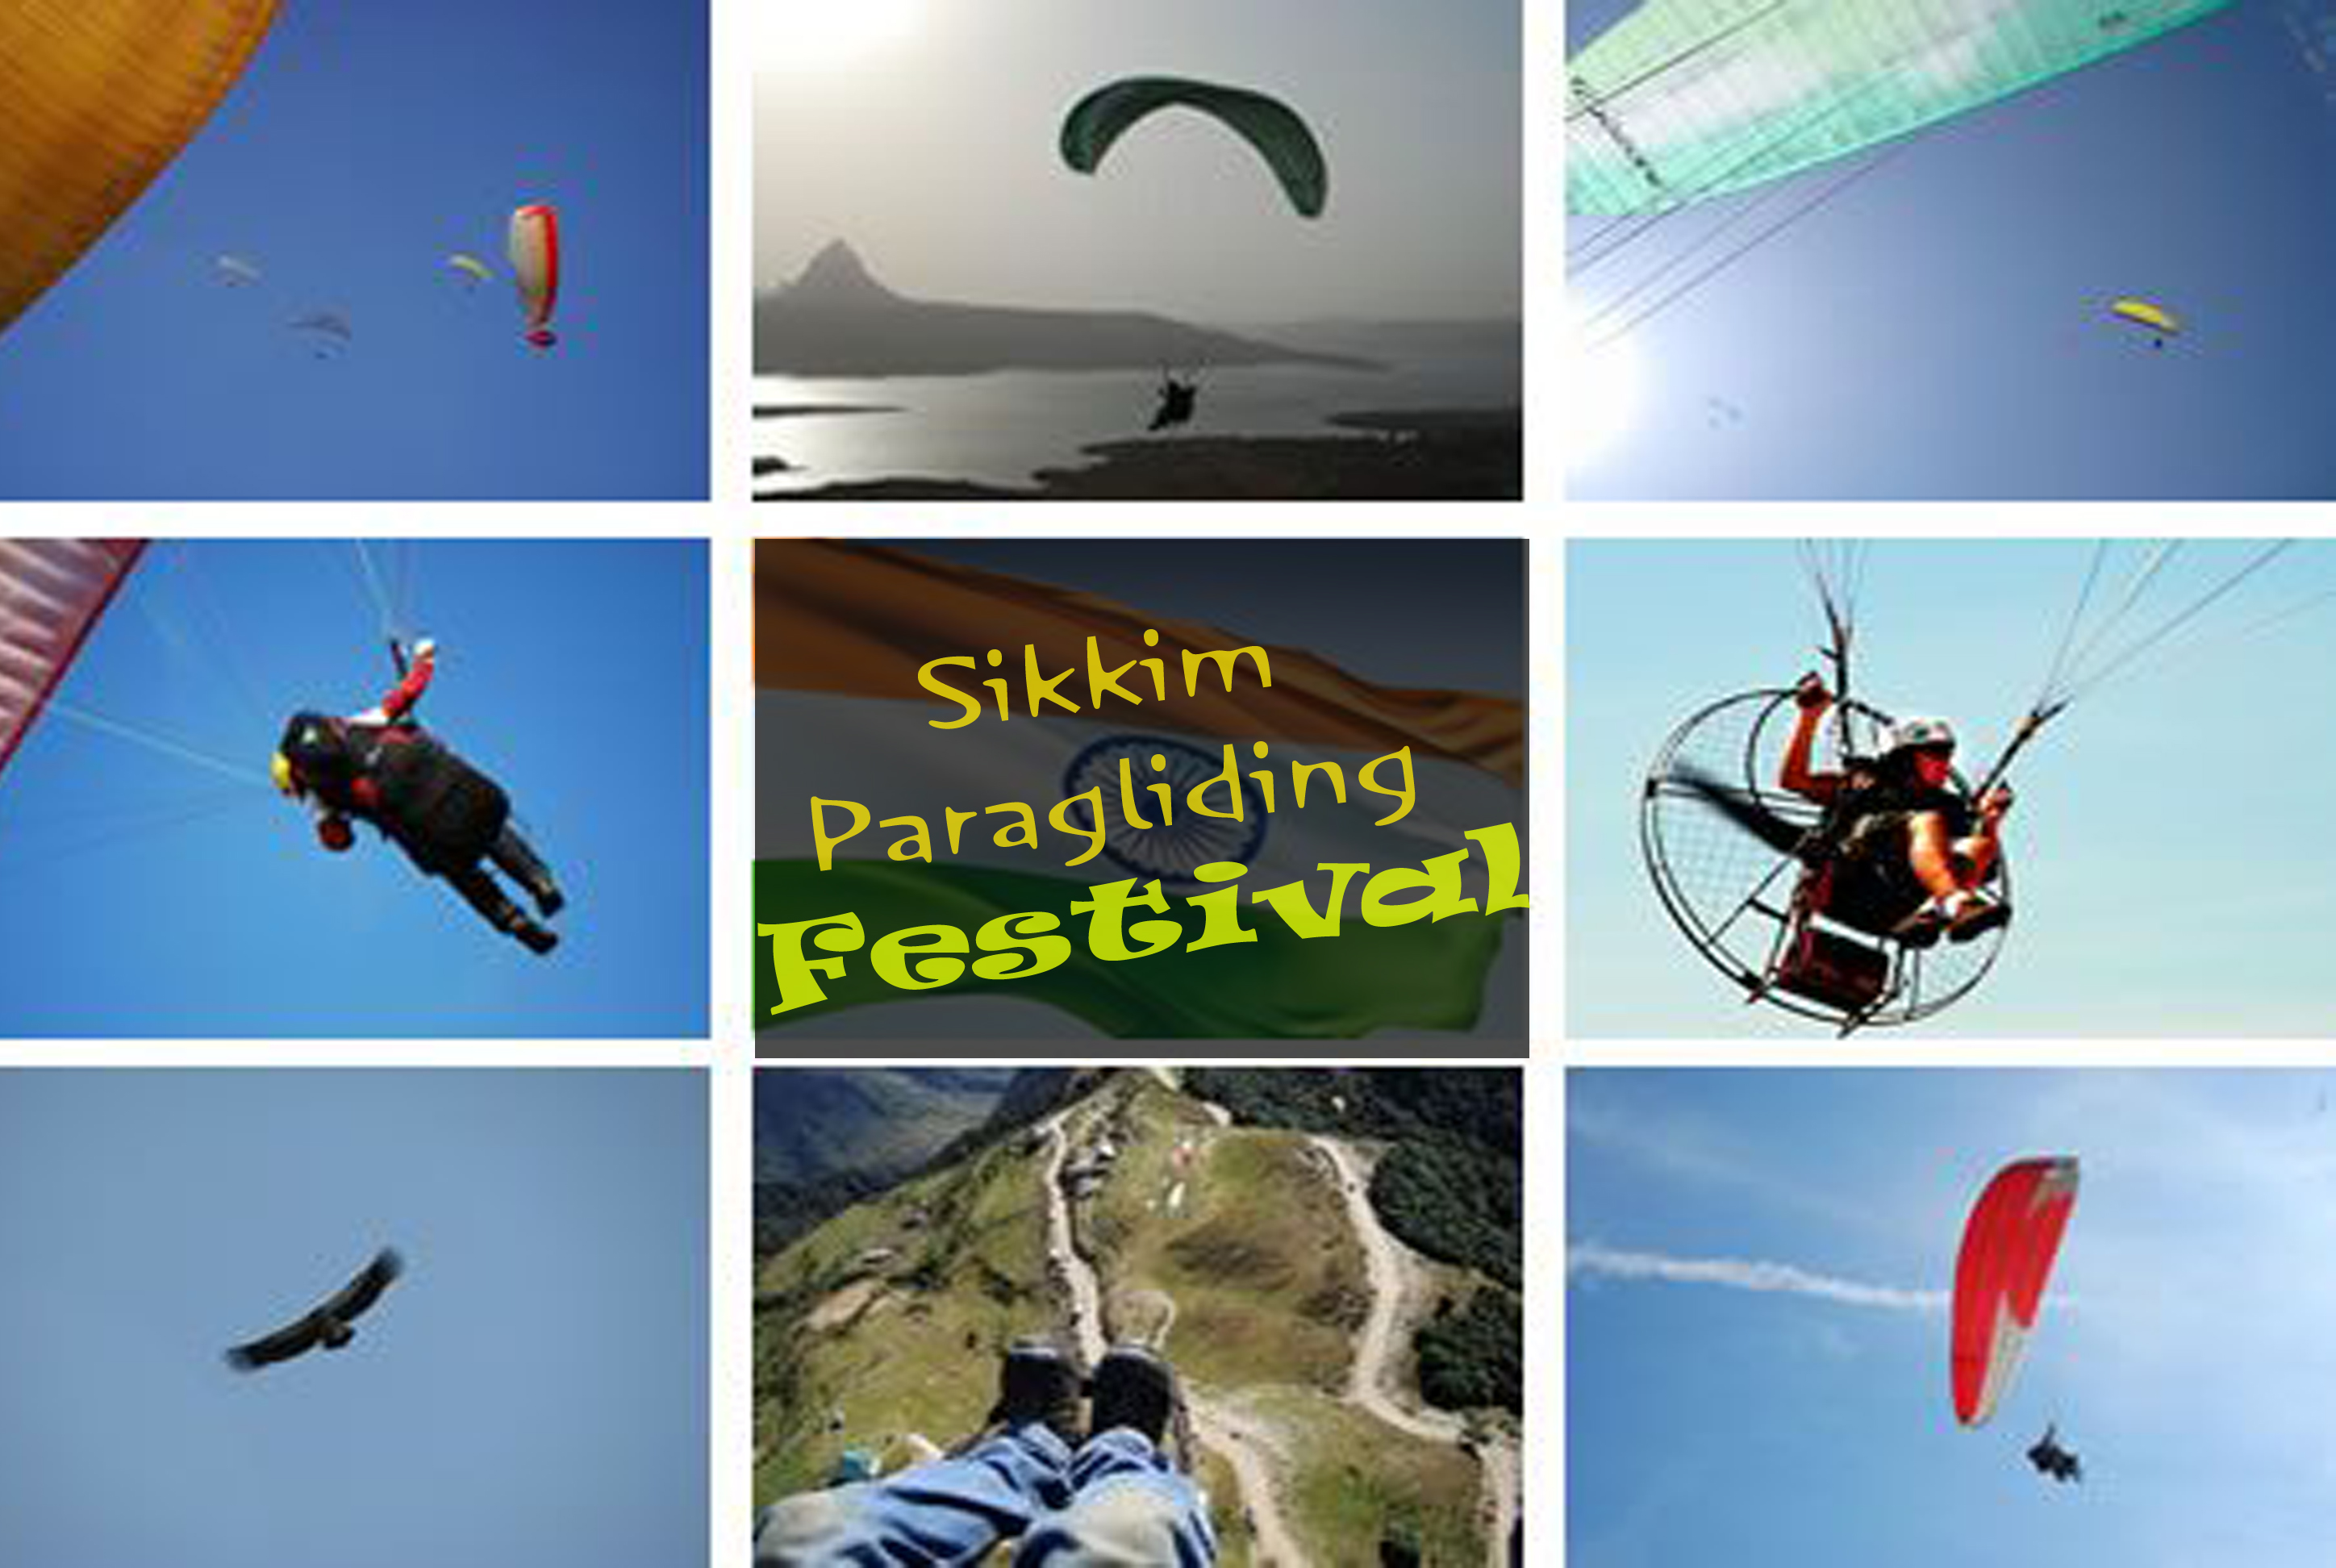 Paragliding Festival In Sikkim